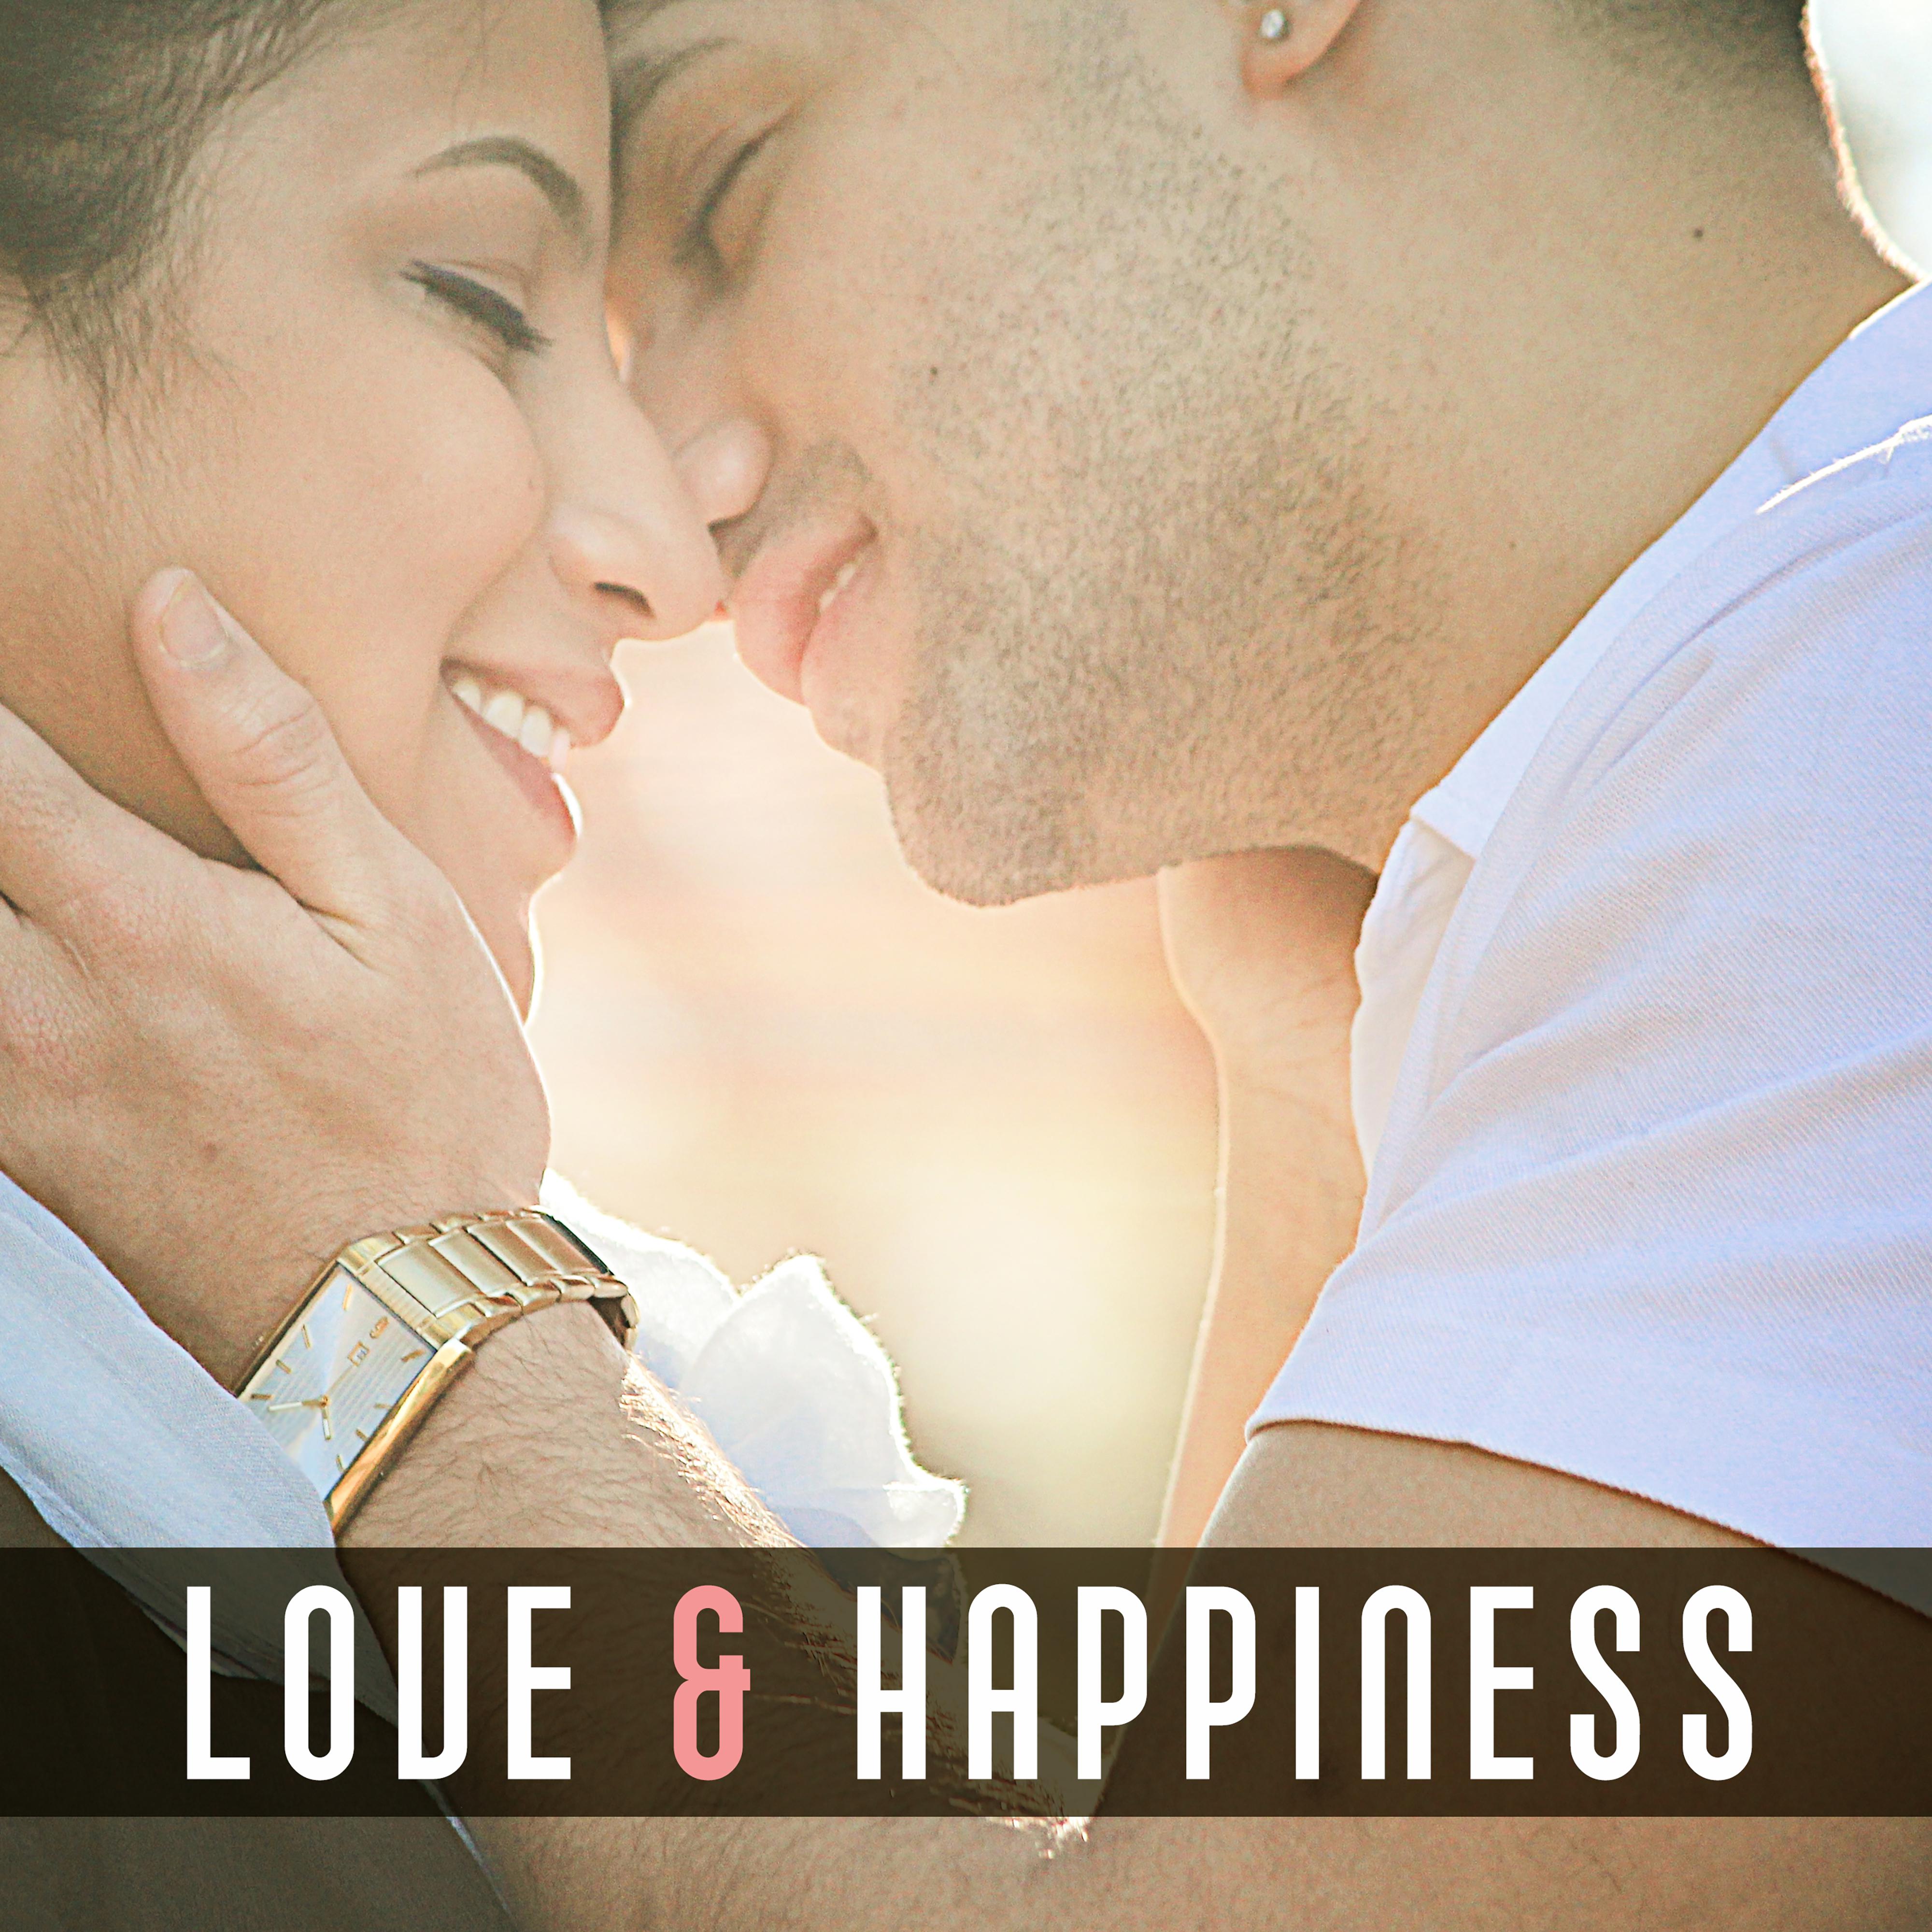 Love  Happiness  Wedding Music, Smooth Jazz, Mellow Guitar, Piano Music, Celebrate Moment, Sax Sounds, Wedding Music